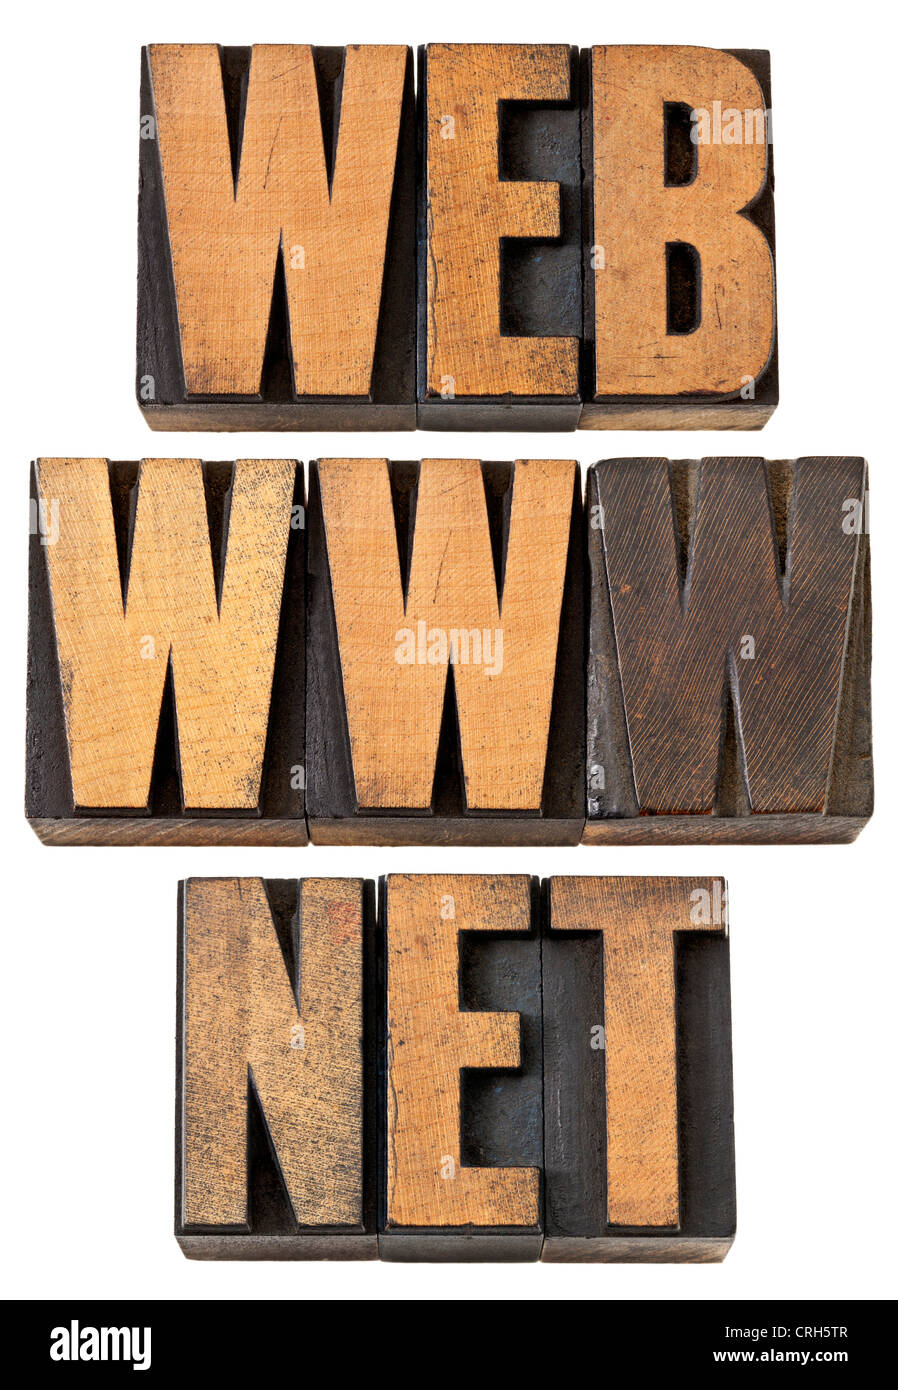 web, www, net - internet concept - isolated text in vintage letterpress wood type Stock Photo